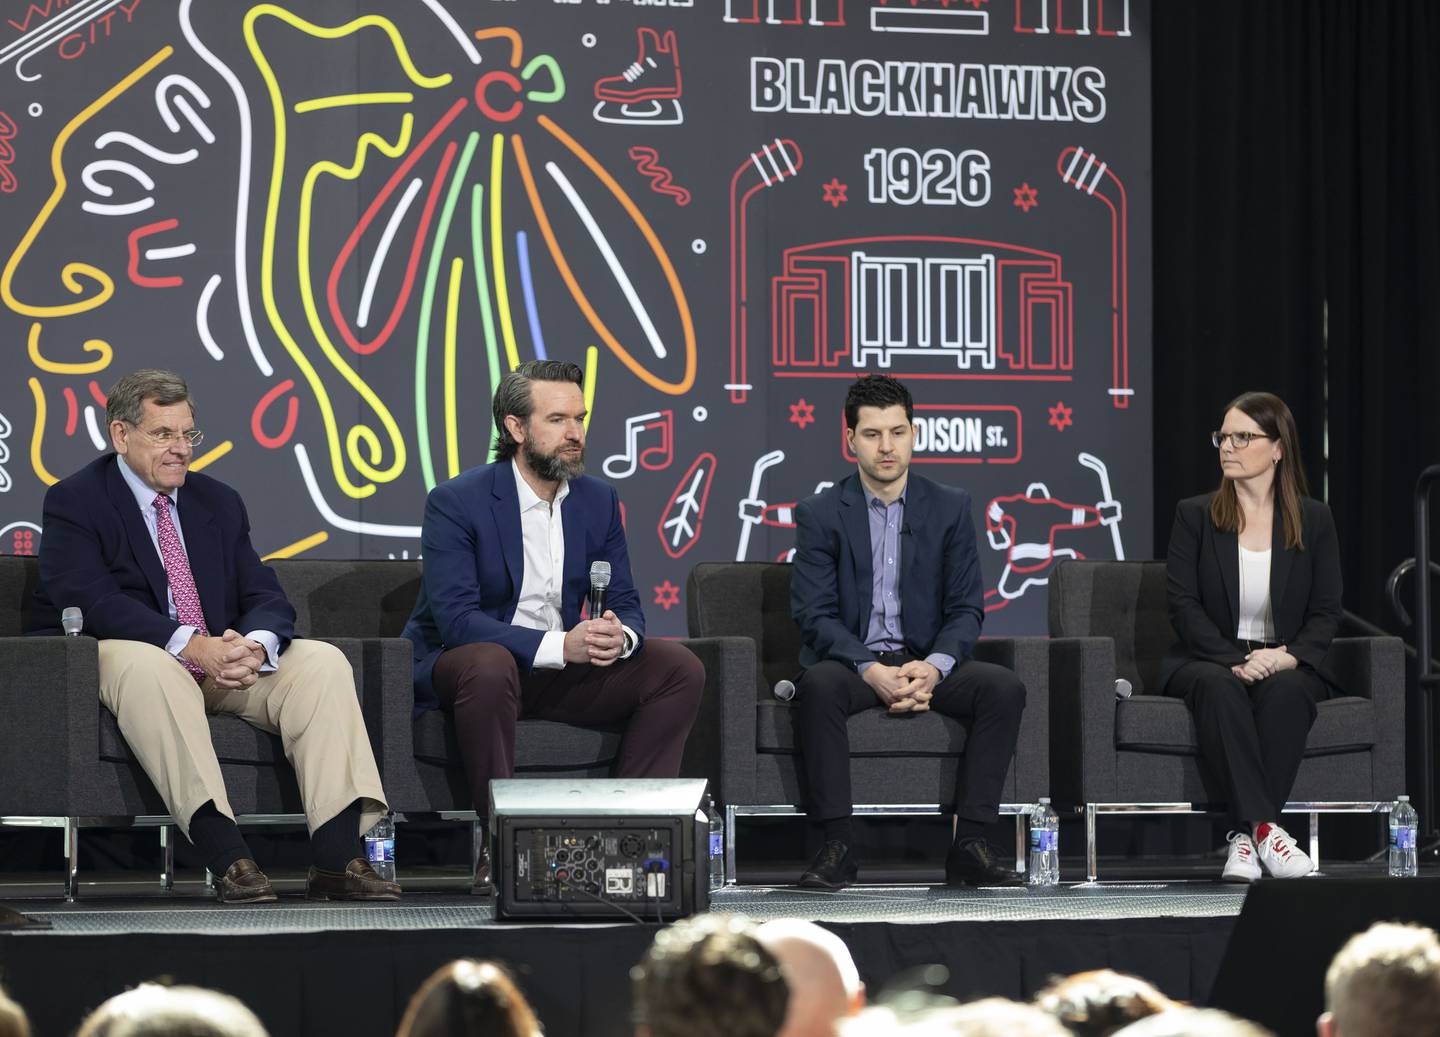 Blackhawks chairman Rocky Wirtz and CEO Danny Wirtz introduce Kyle Davidson as their new general manager with Jaime Faulkner, president of business operations, on March 1, 2022, at the United Center.